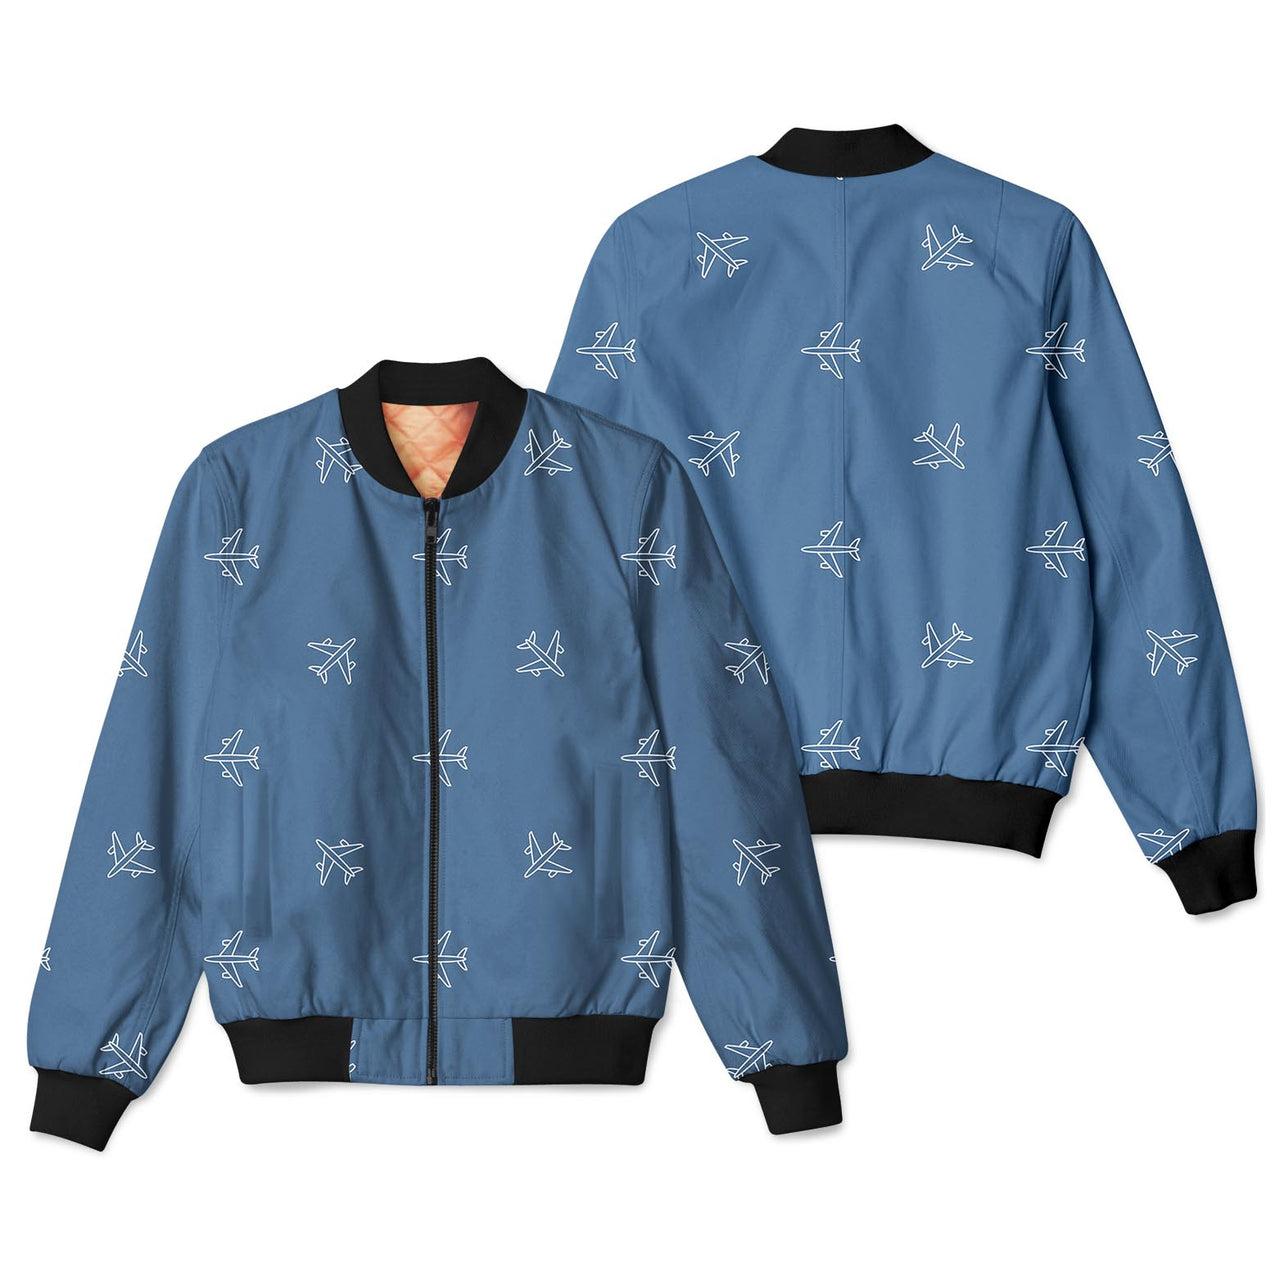 Nice Airplanes Designed 3D Pilot Bomber Jackets